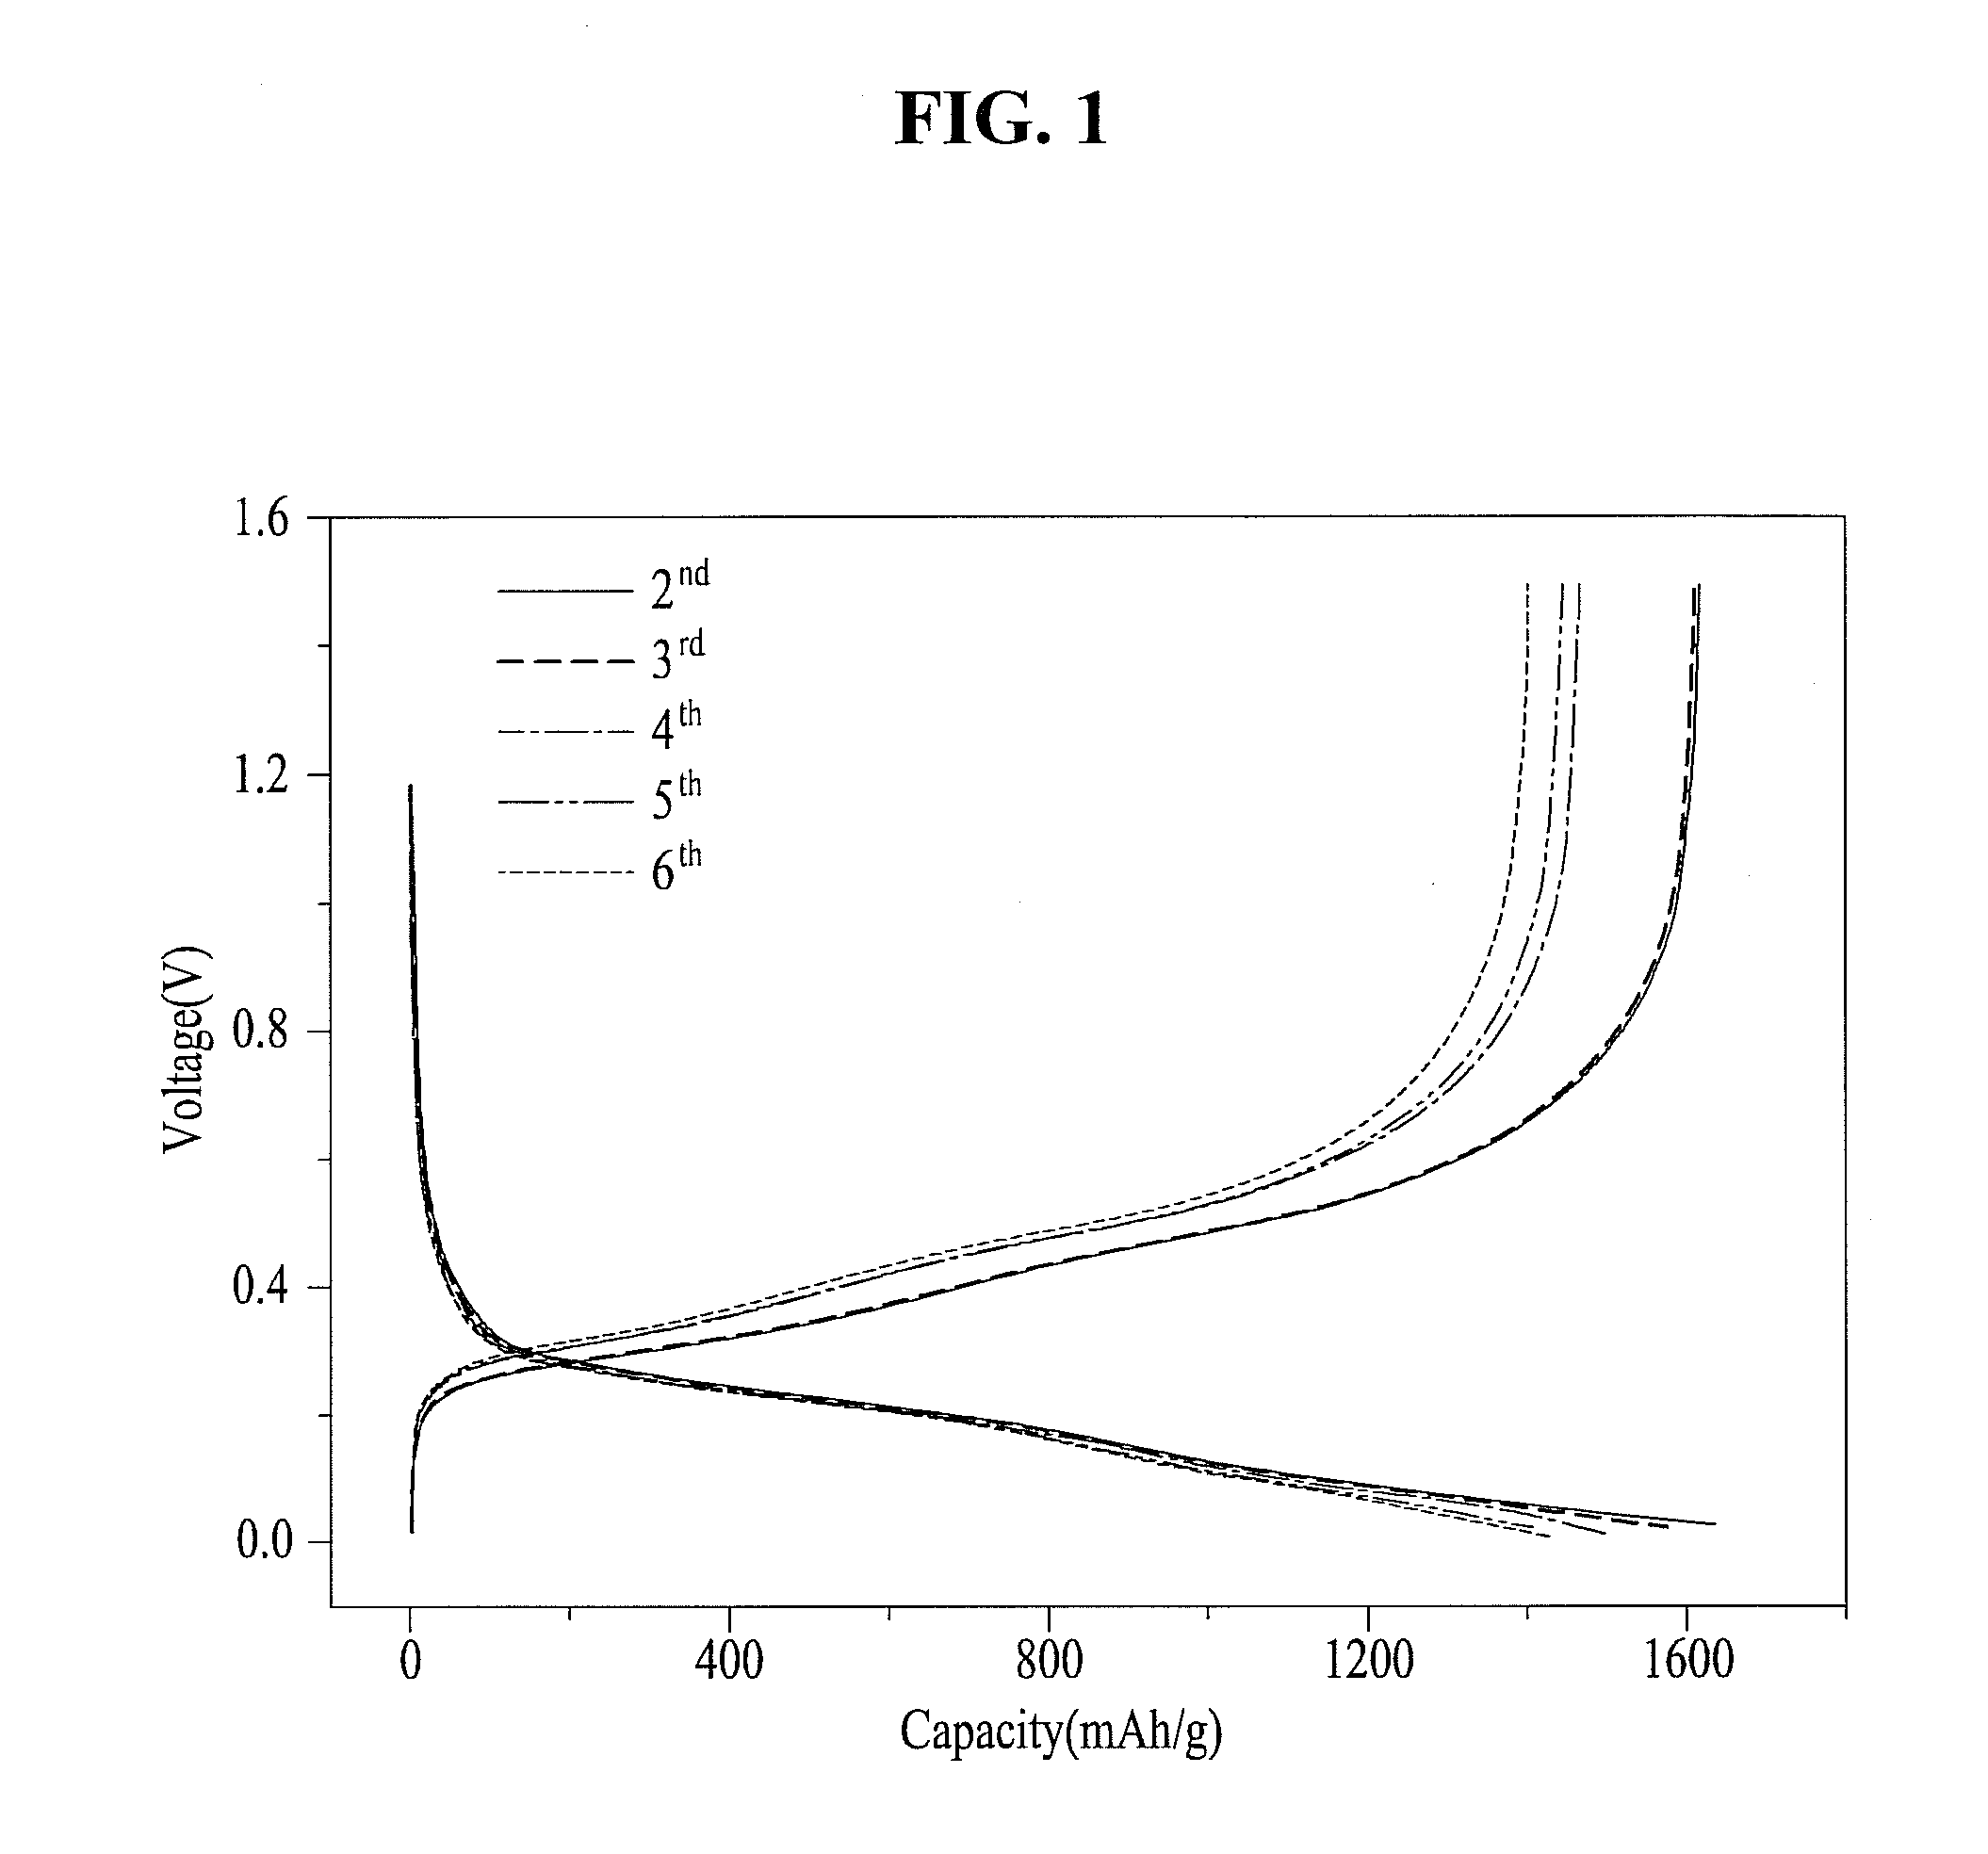 ELECTRODE BINDING MATERIAL WITH Li, Na, K SUBSTITUTED FOR POLYACRYLIC ACID FUNCTIONAL GROUP (COOH) AND A LITHIUM SECONDARY BATTERY USING THE SAME